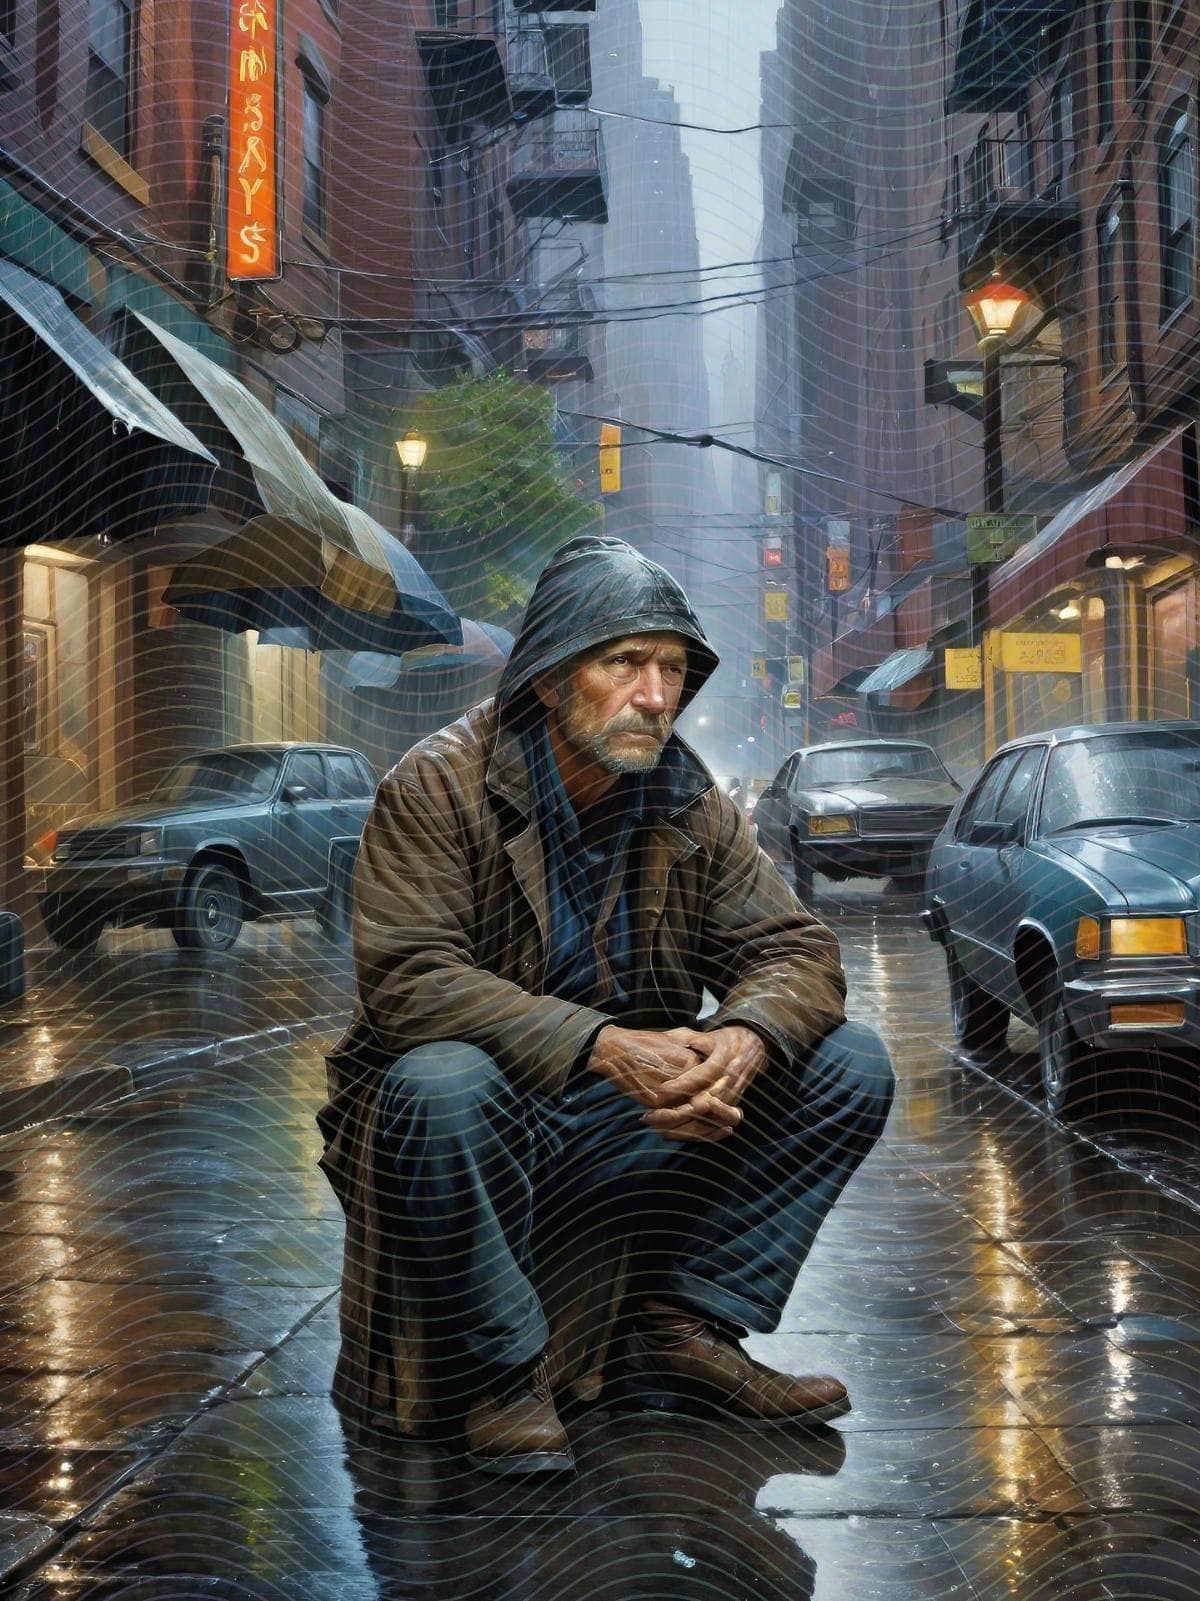 A Detailed Scene of A Man Sitting on the Ground in the Rain